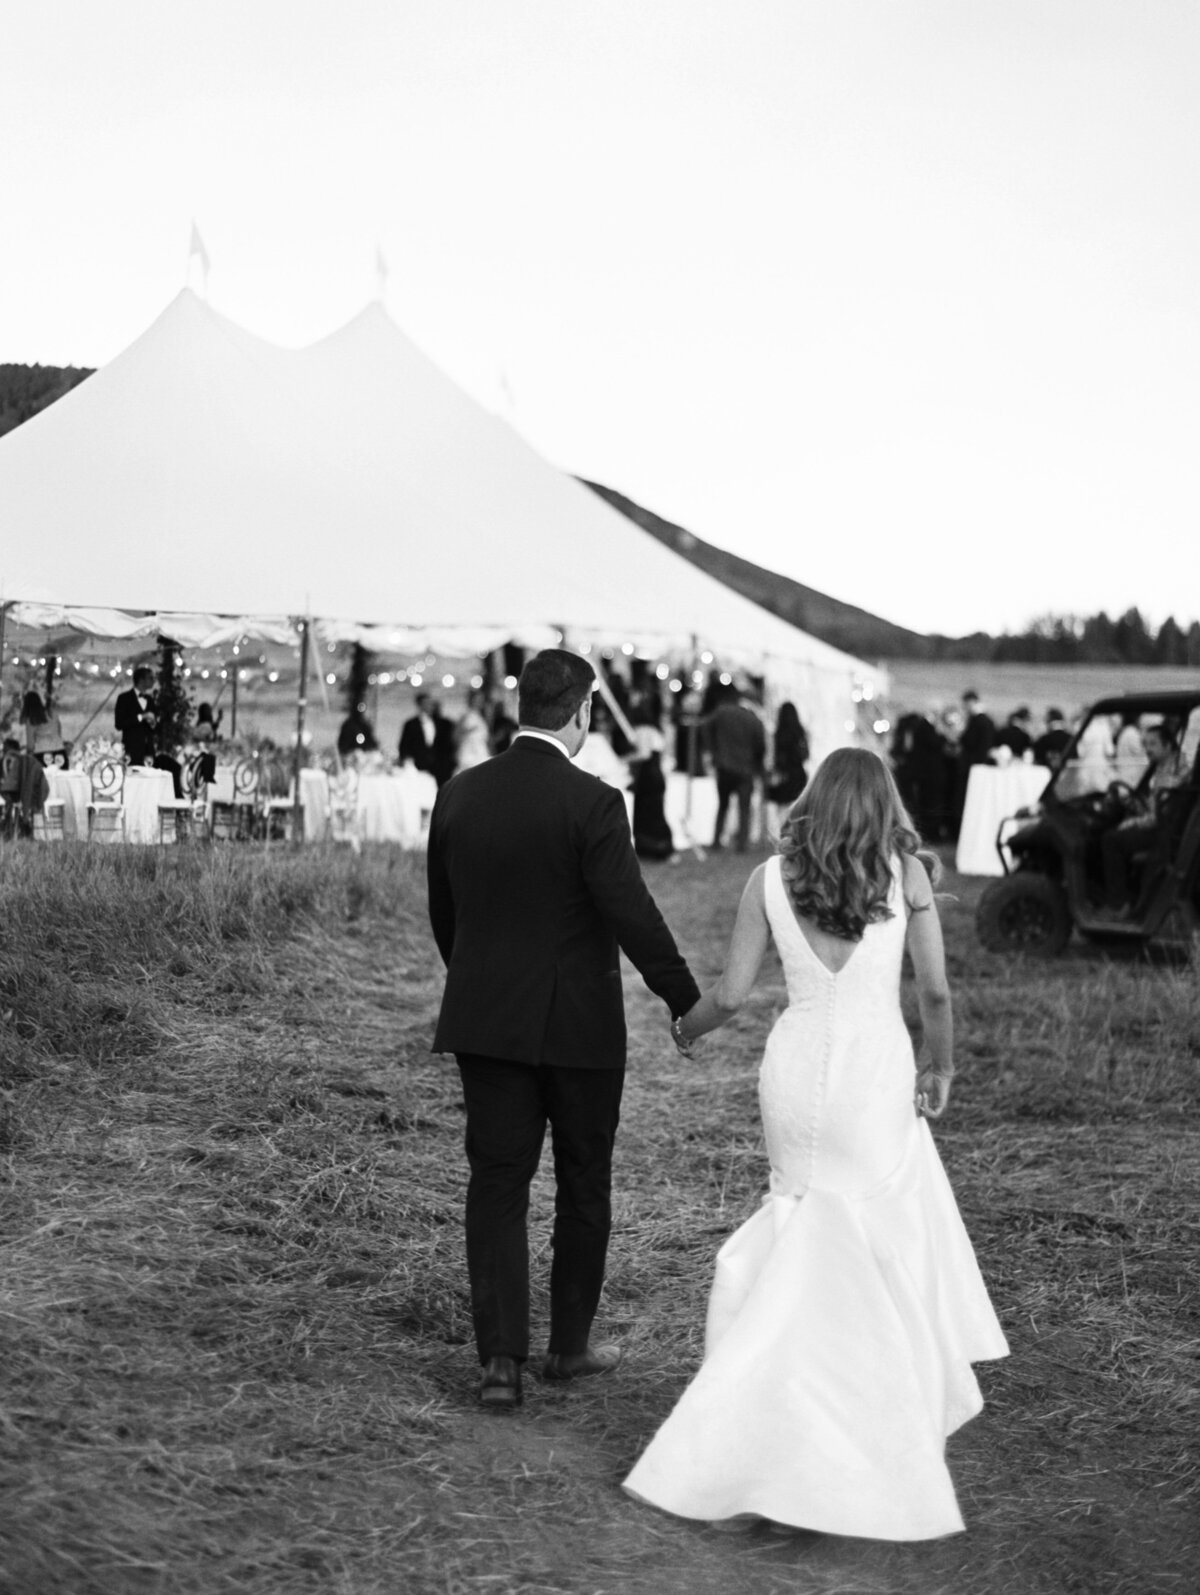 Bride and groom at tented wedding